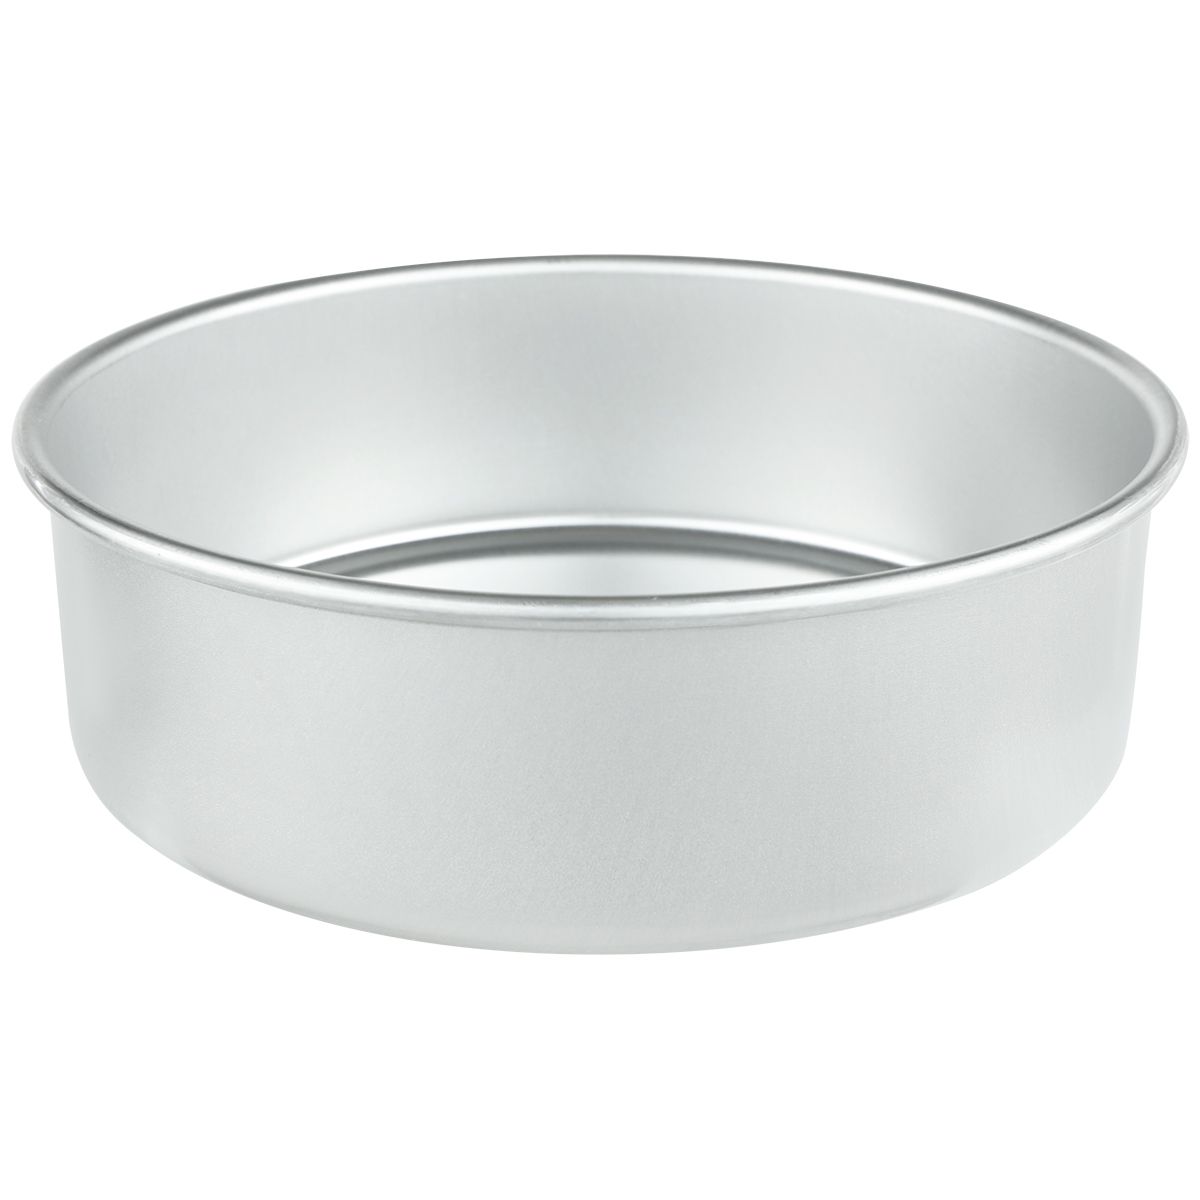 Chef Approved 224271 9 x 3 Aluminum Cake Pan